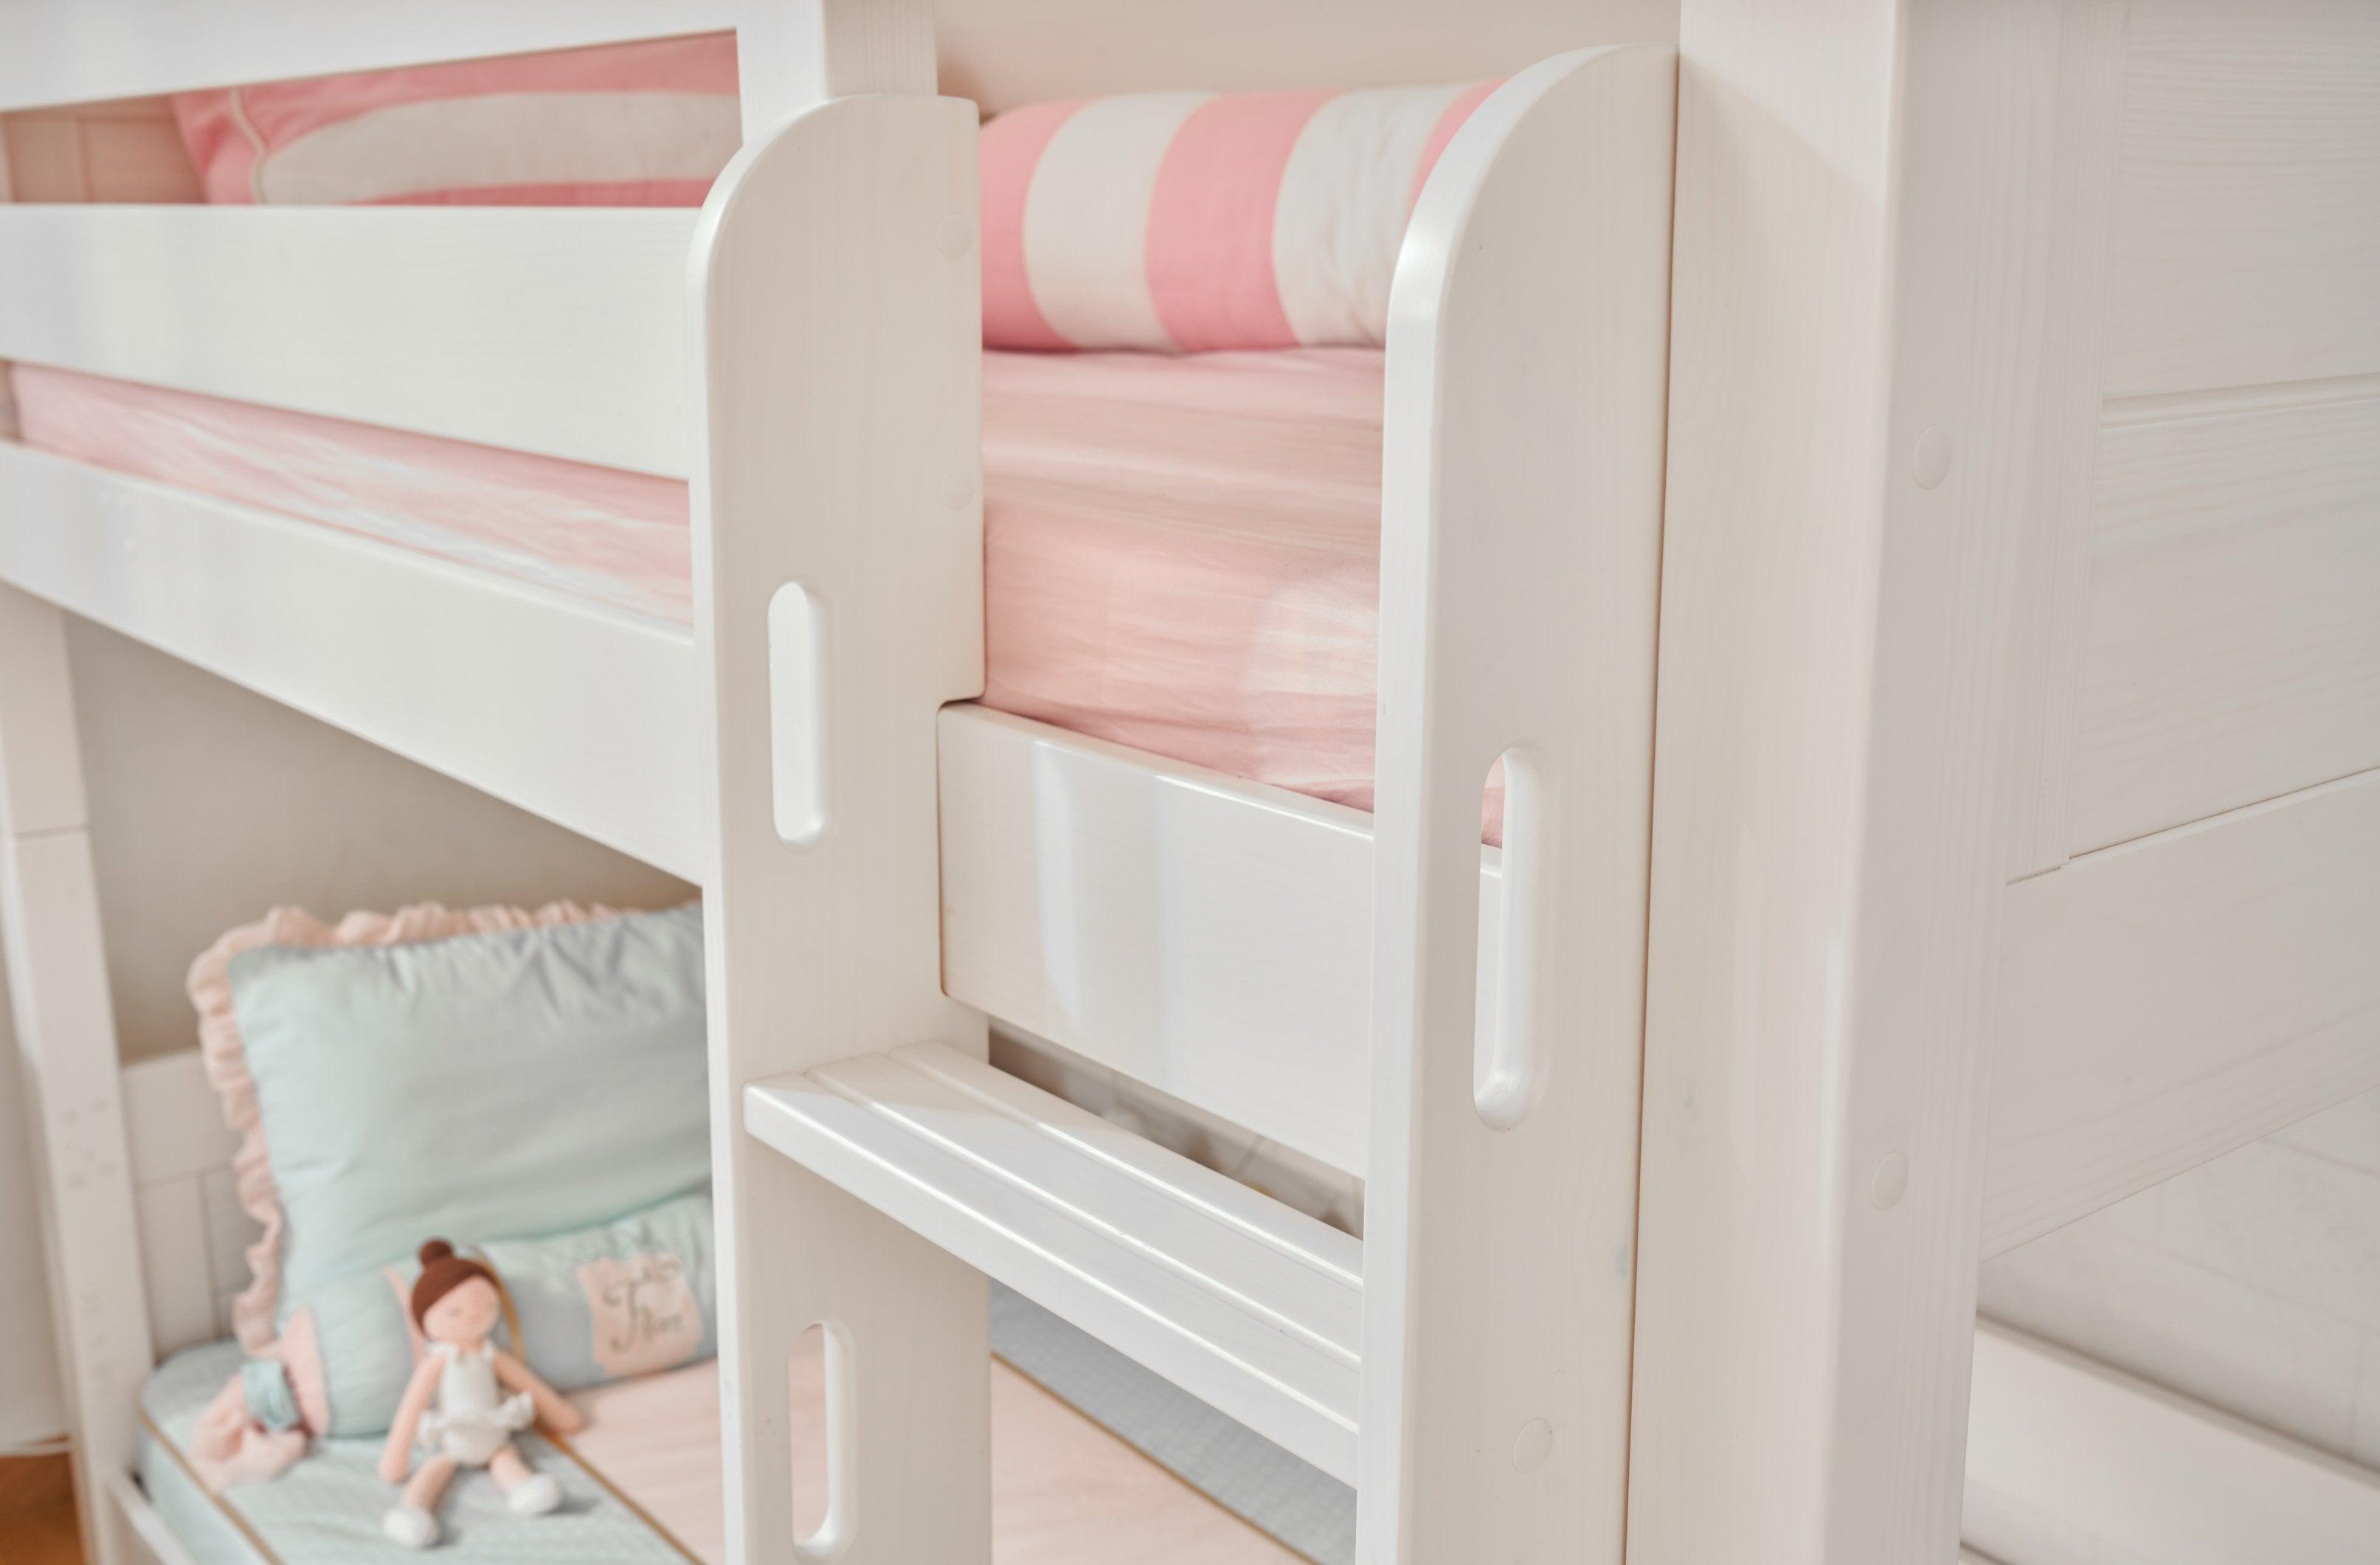 ModBed High Bunk Bed (with roof & pullout options - Single or SS) - Kids Haven